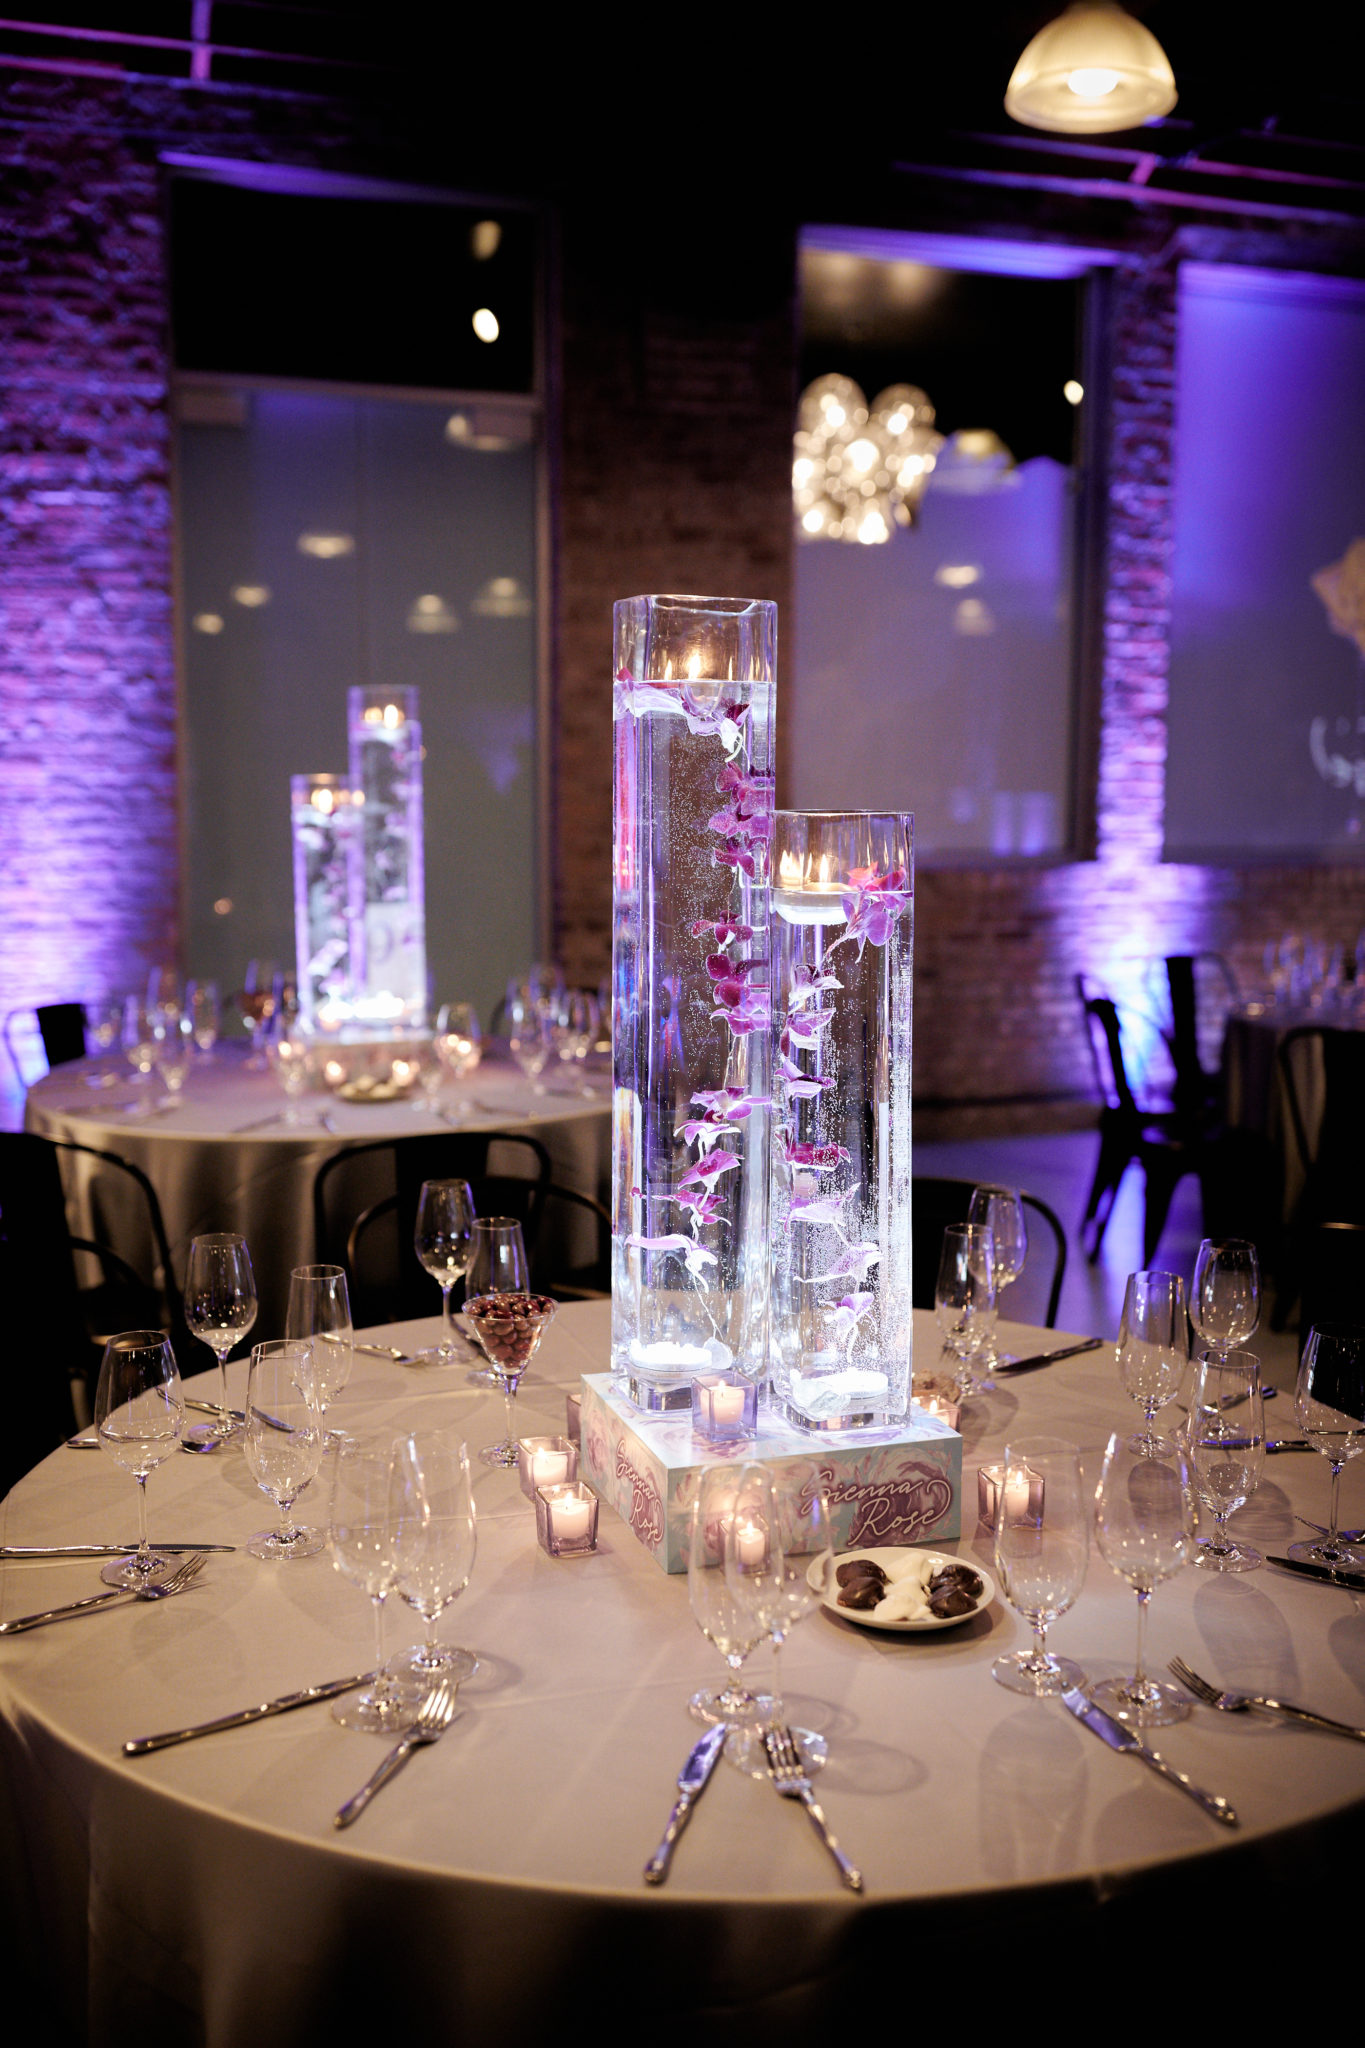 Sienna’s Bat Mitzvah at Anshe Emet and Architectural Events